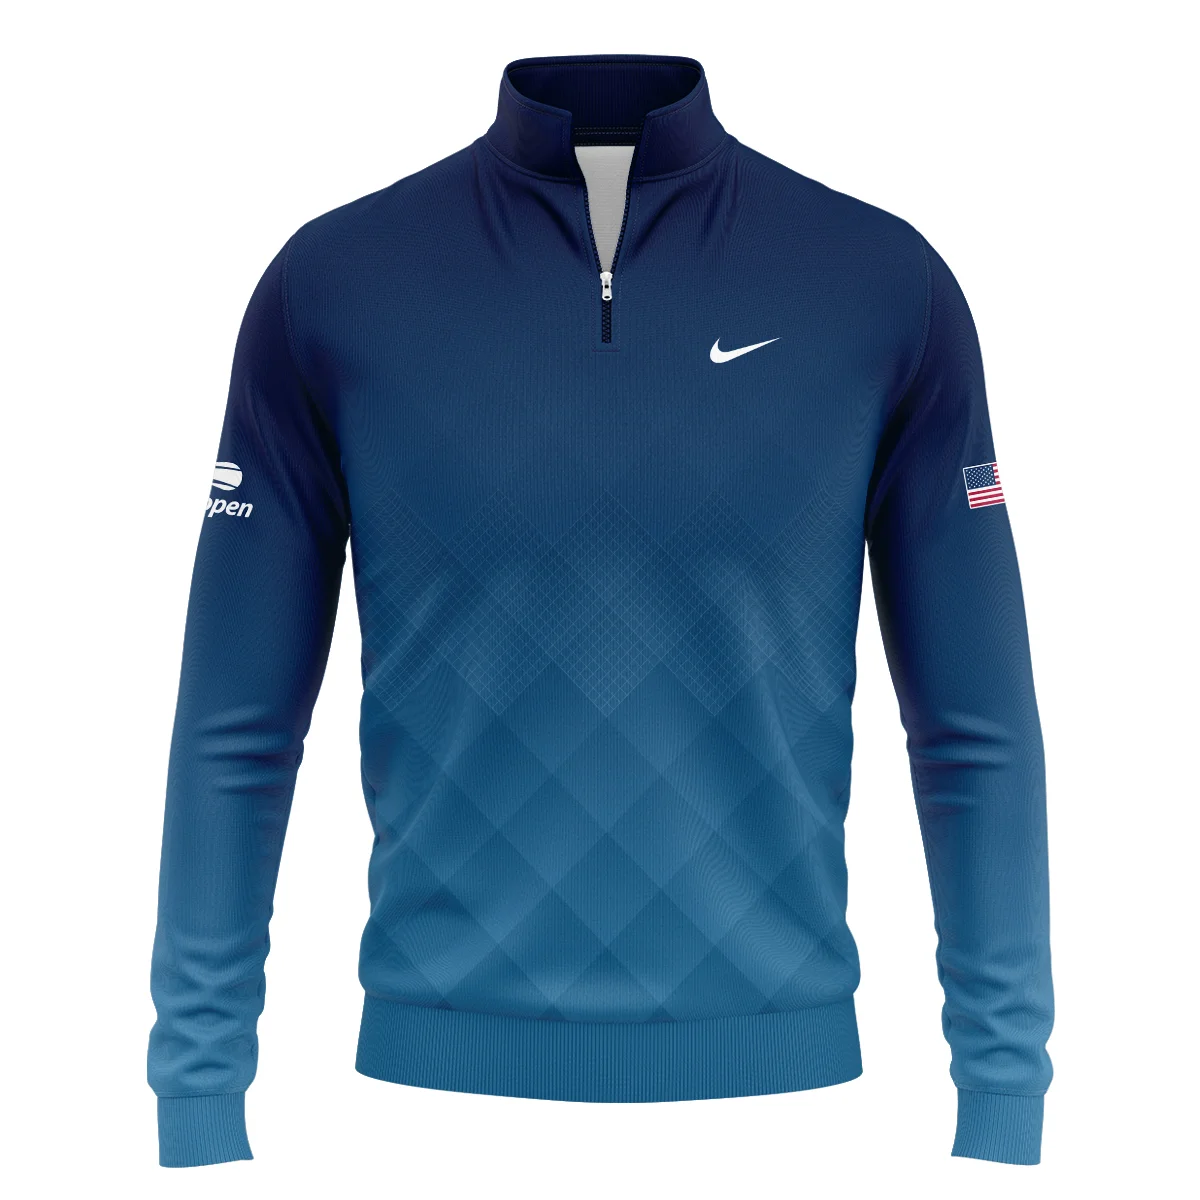 Nike Blue Abstract Background US Open Tennis Champions Polo Shirt Style Classic Polo Shirt For Men